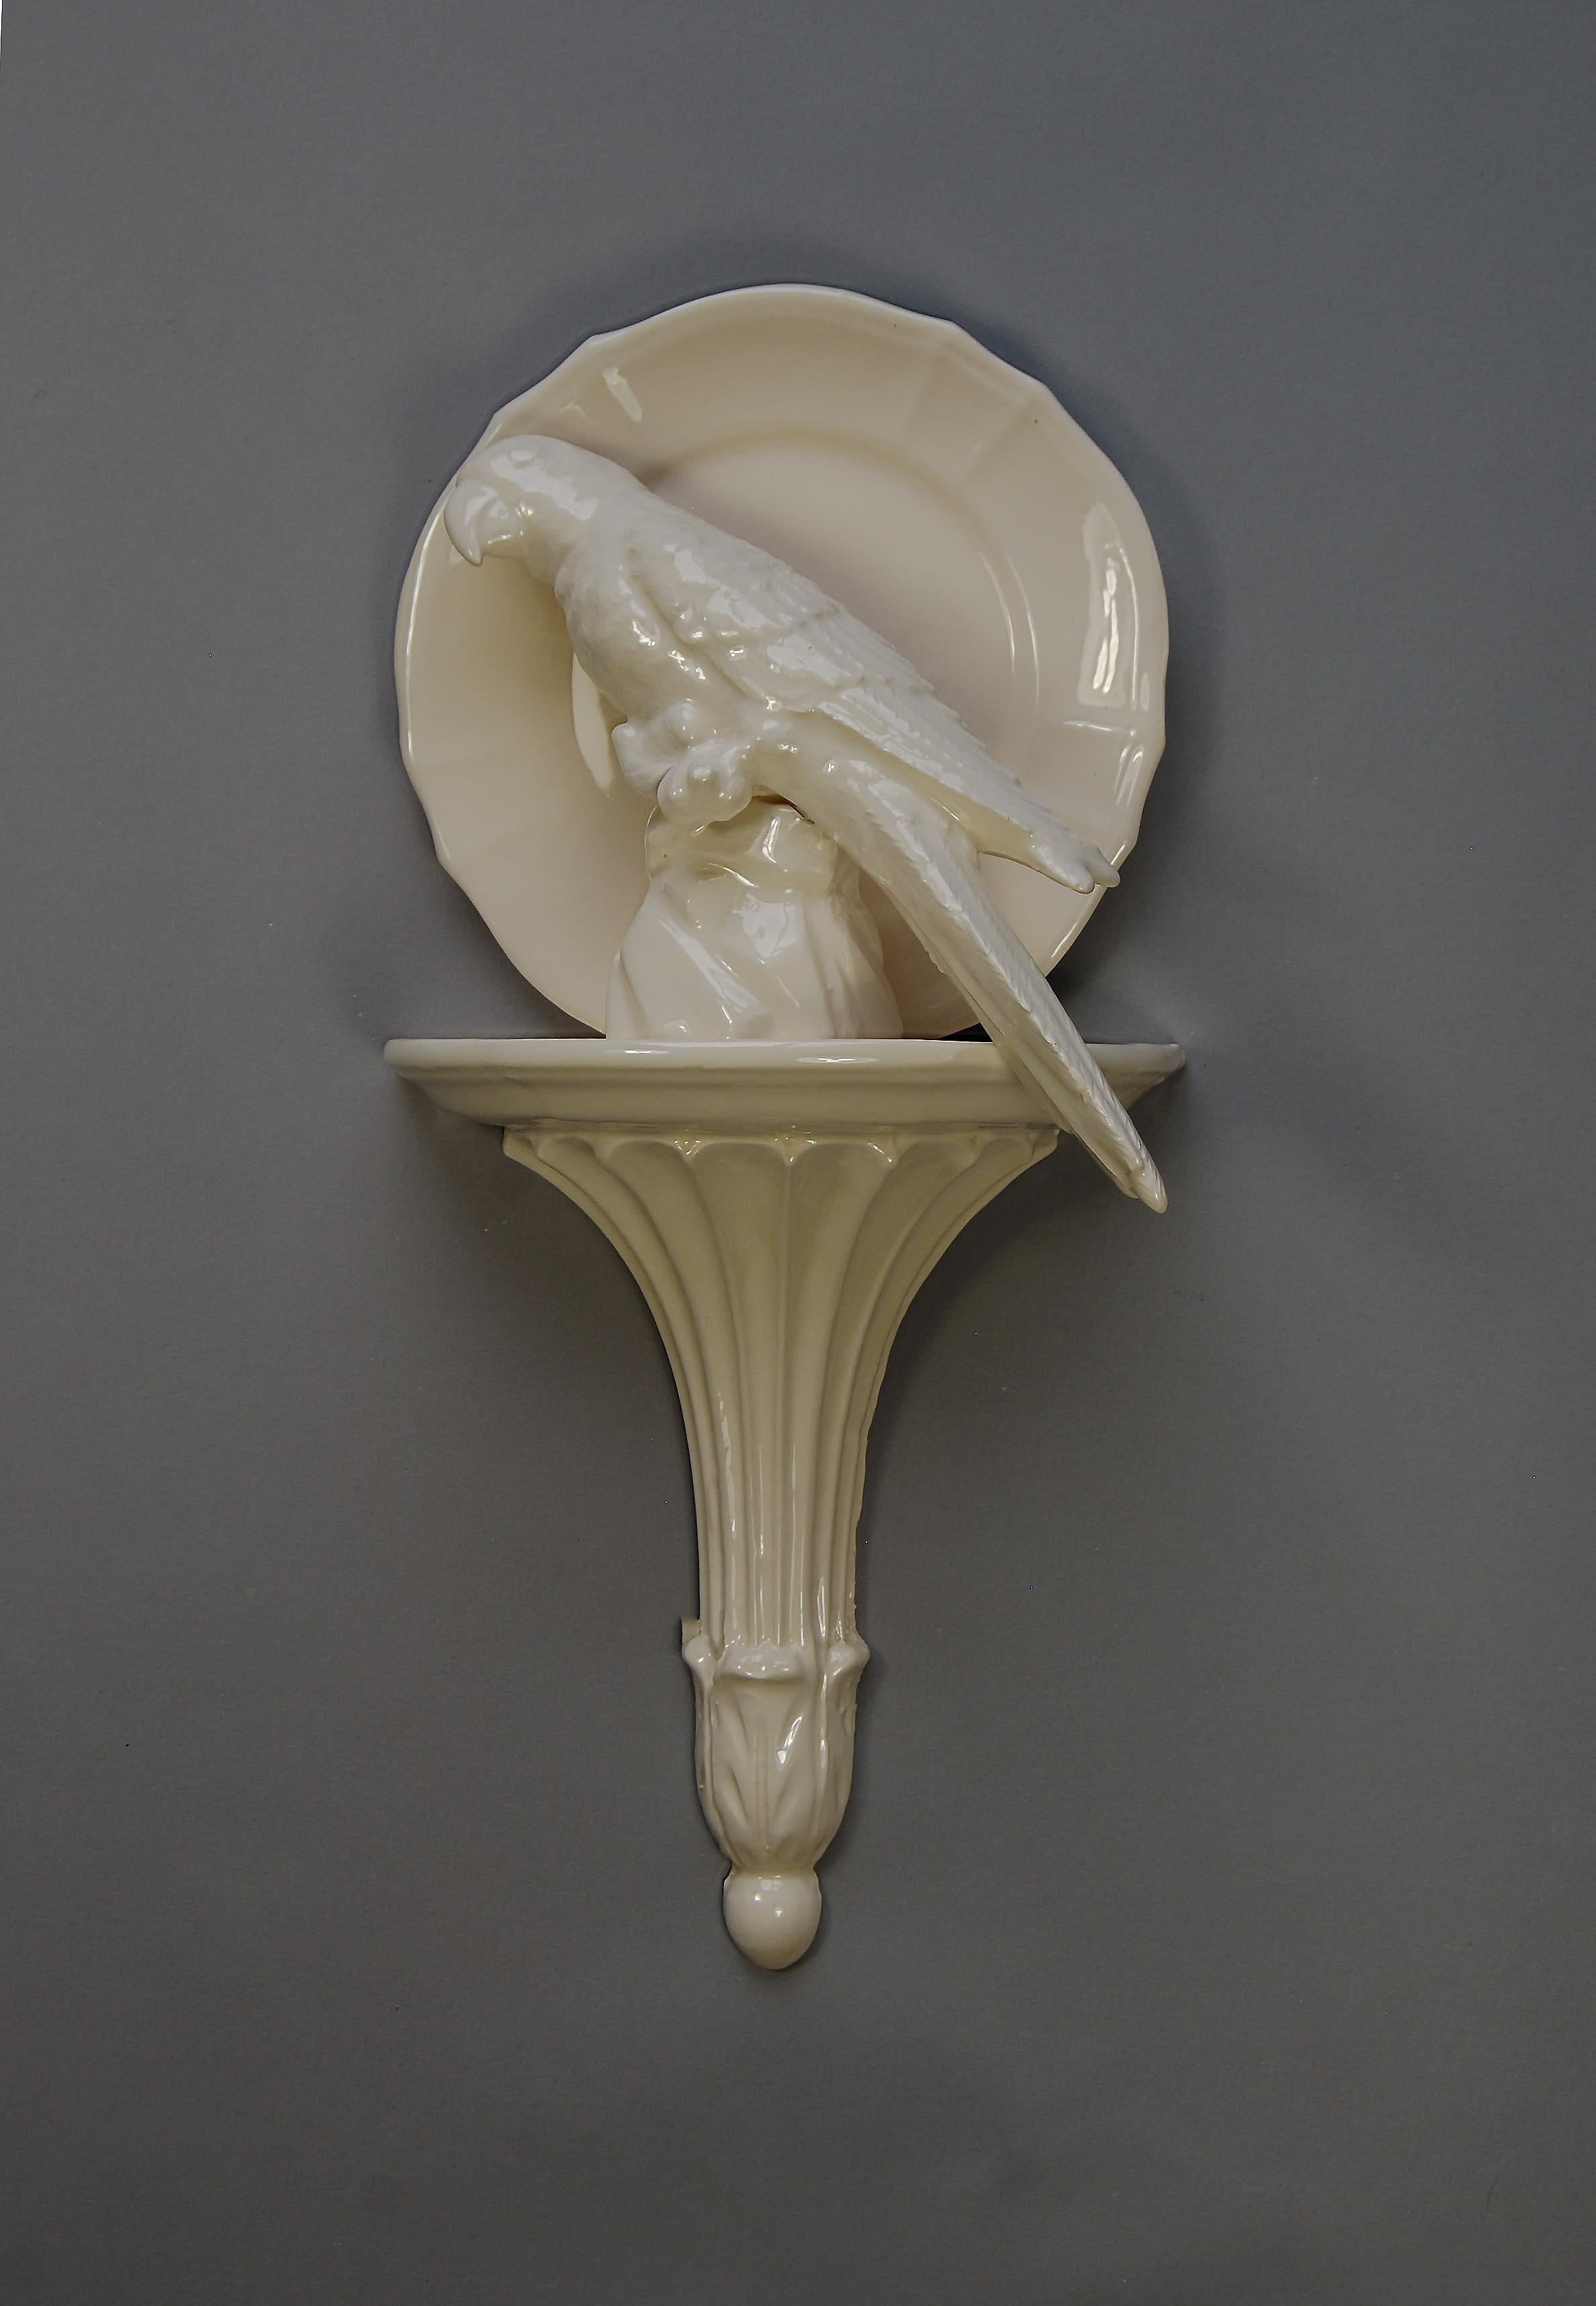 Matt Smith, Sconce Parrot with Plate Looking Left, White Earthenware